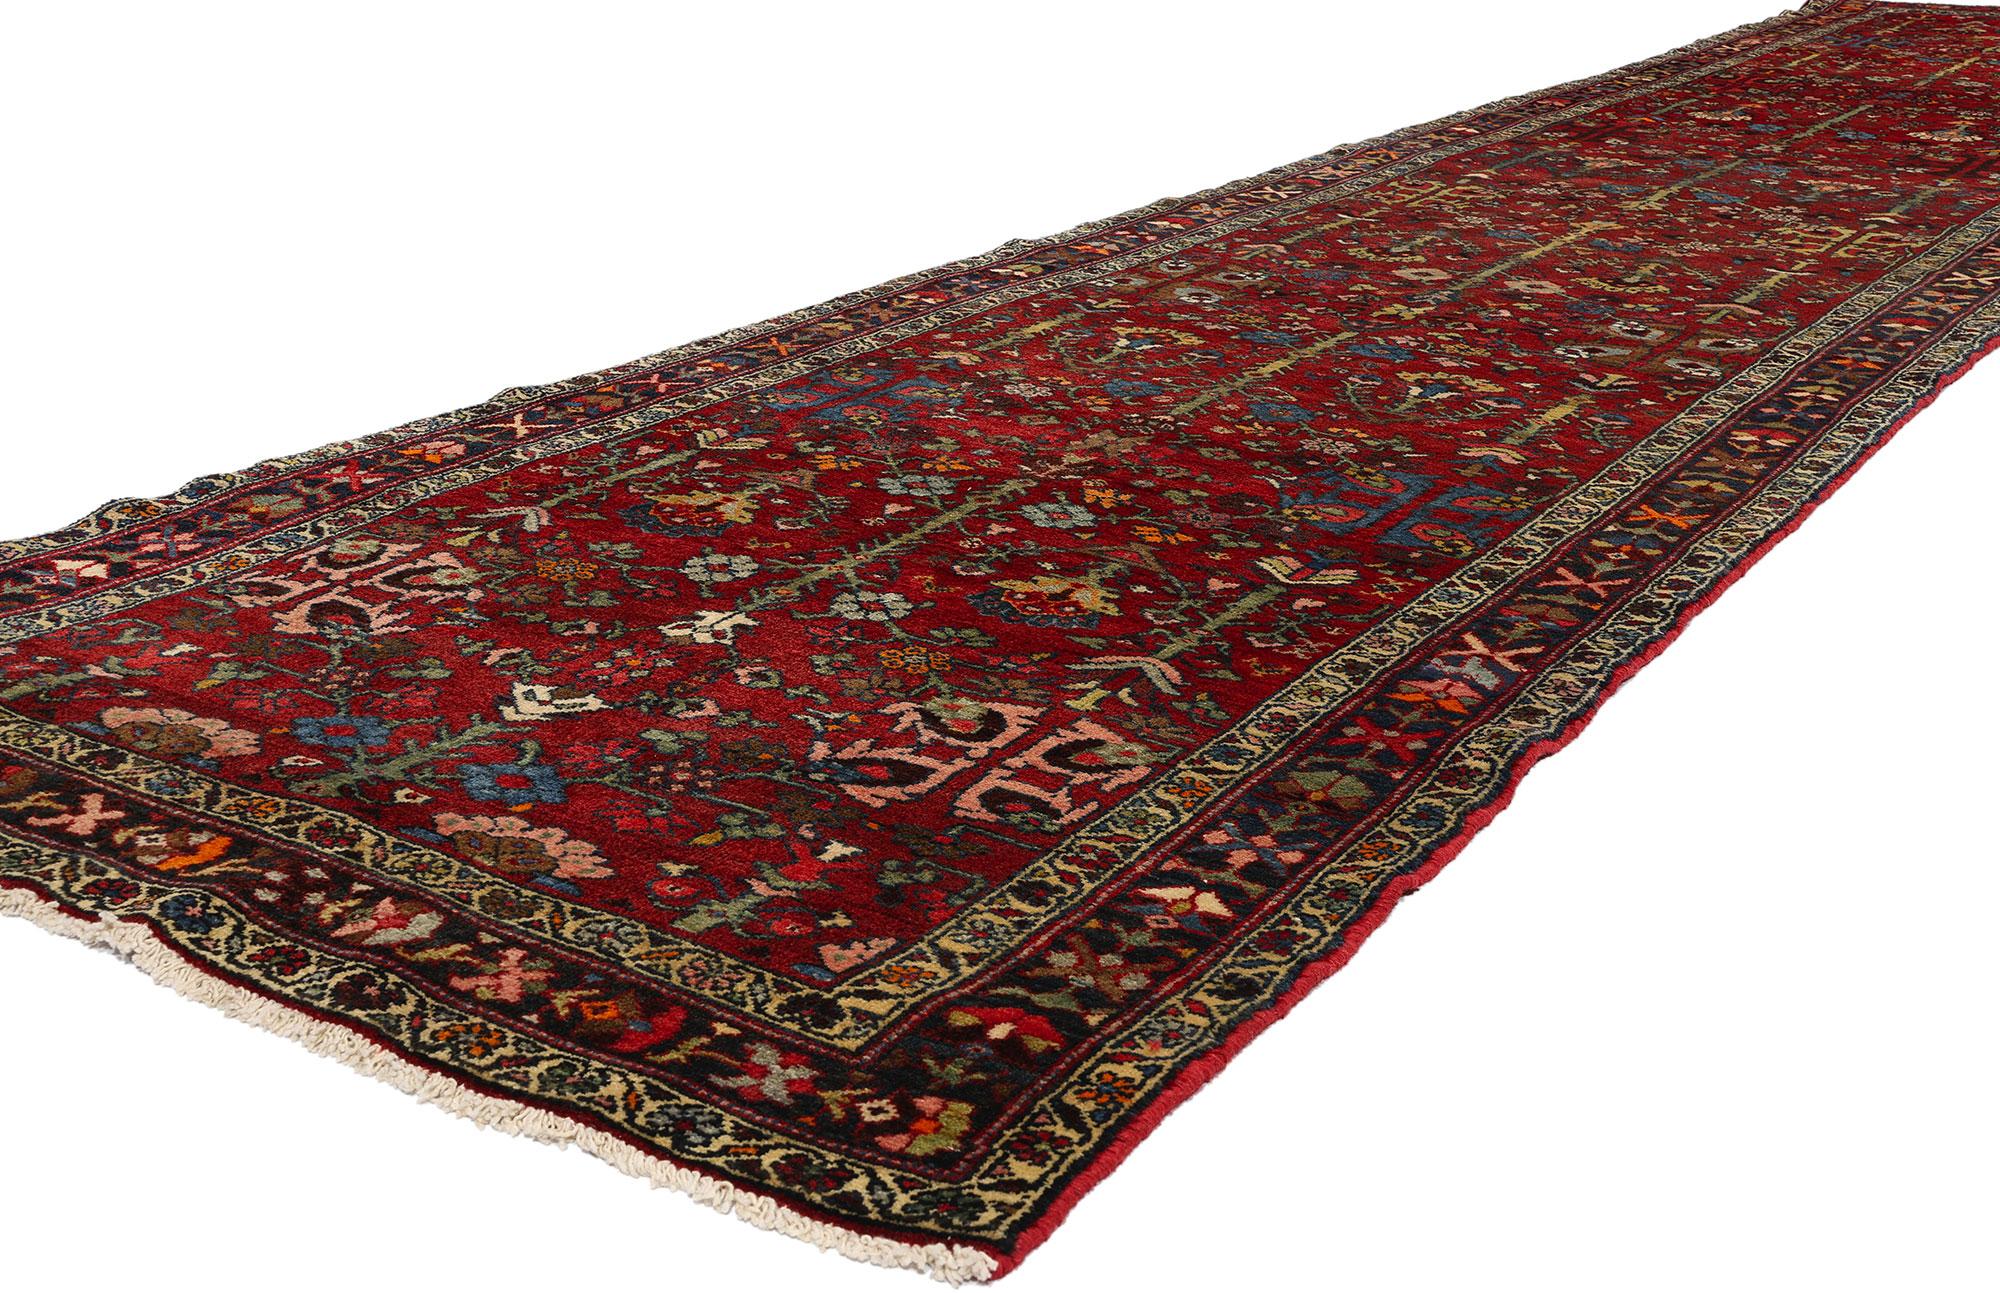 78727 Vintage Red Persian Hamadan Rug Runner, 03'05 x 17'00. This is a listing for one piece. Please note it does have a matching piece that is available. What sets this rug apart is its rarity - a precious relic from the 1940s, when Hamadan rugs